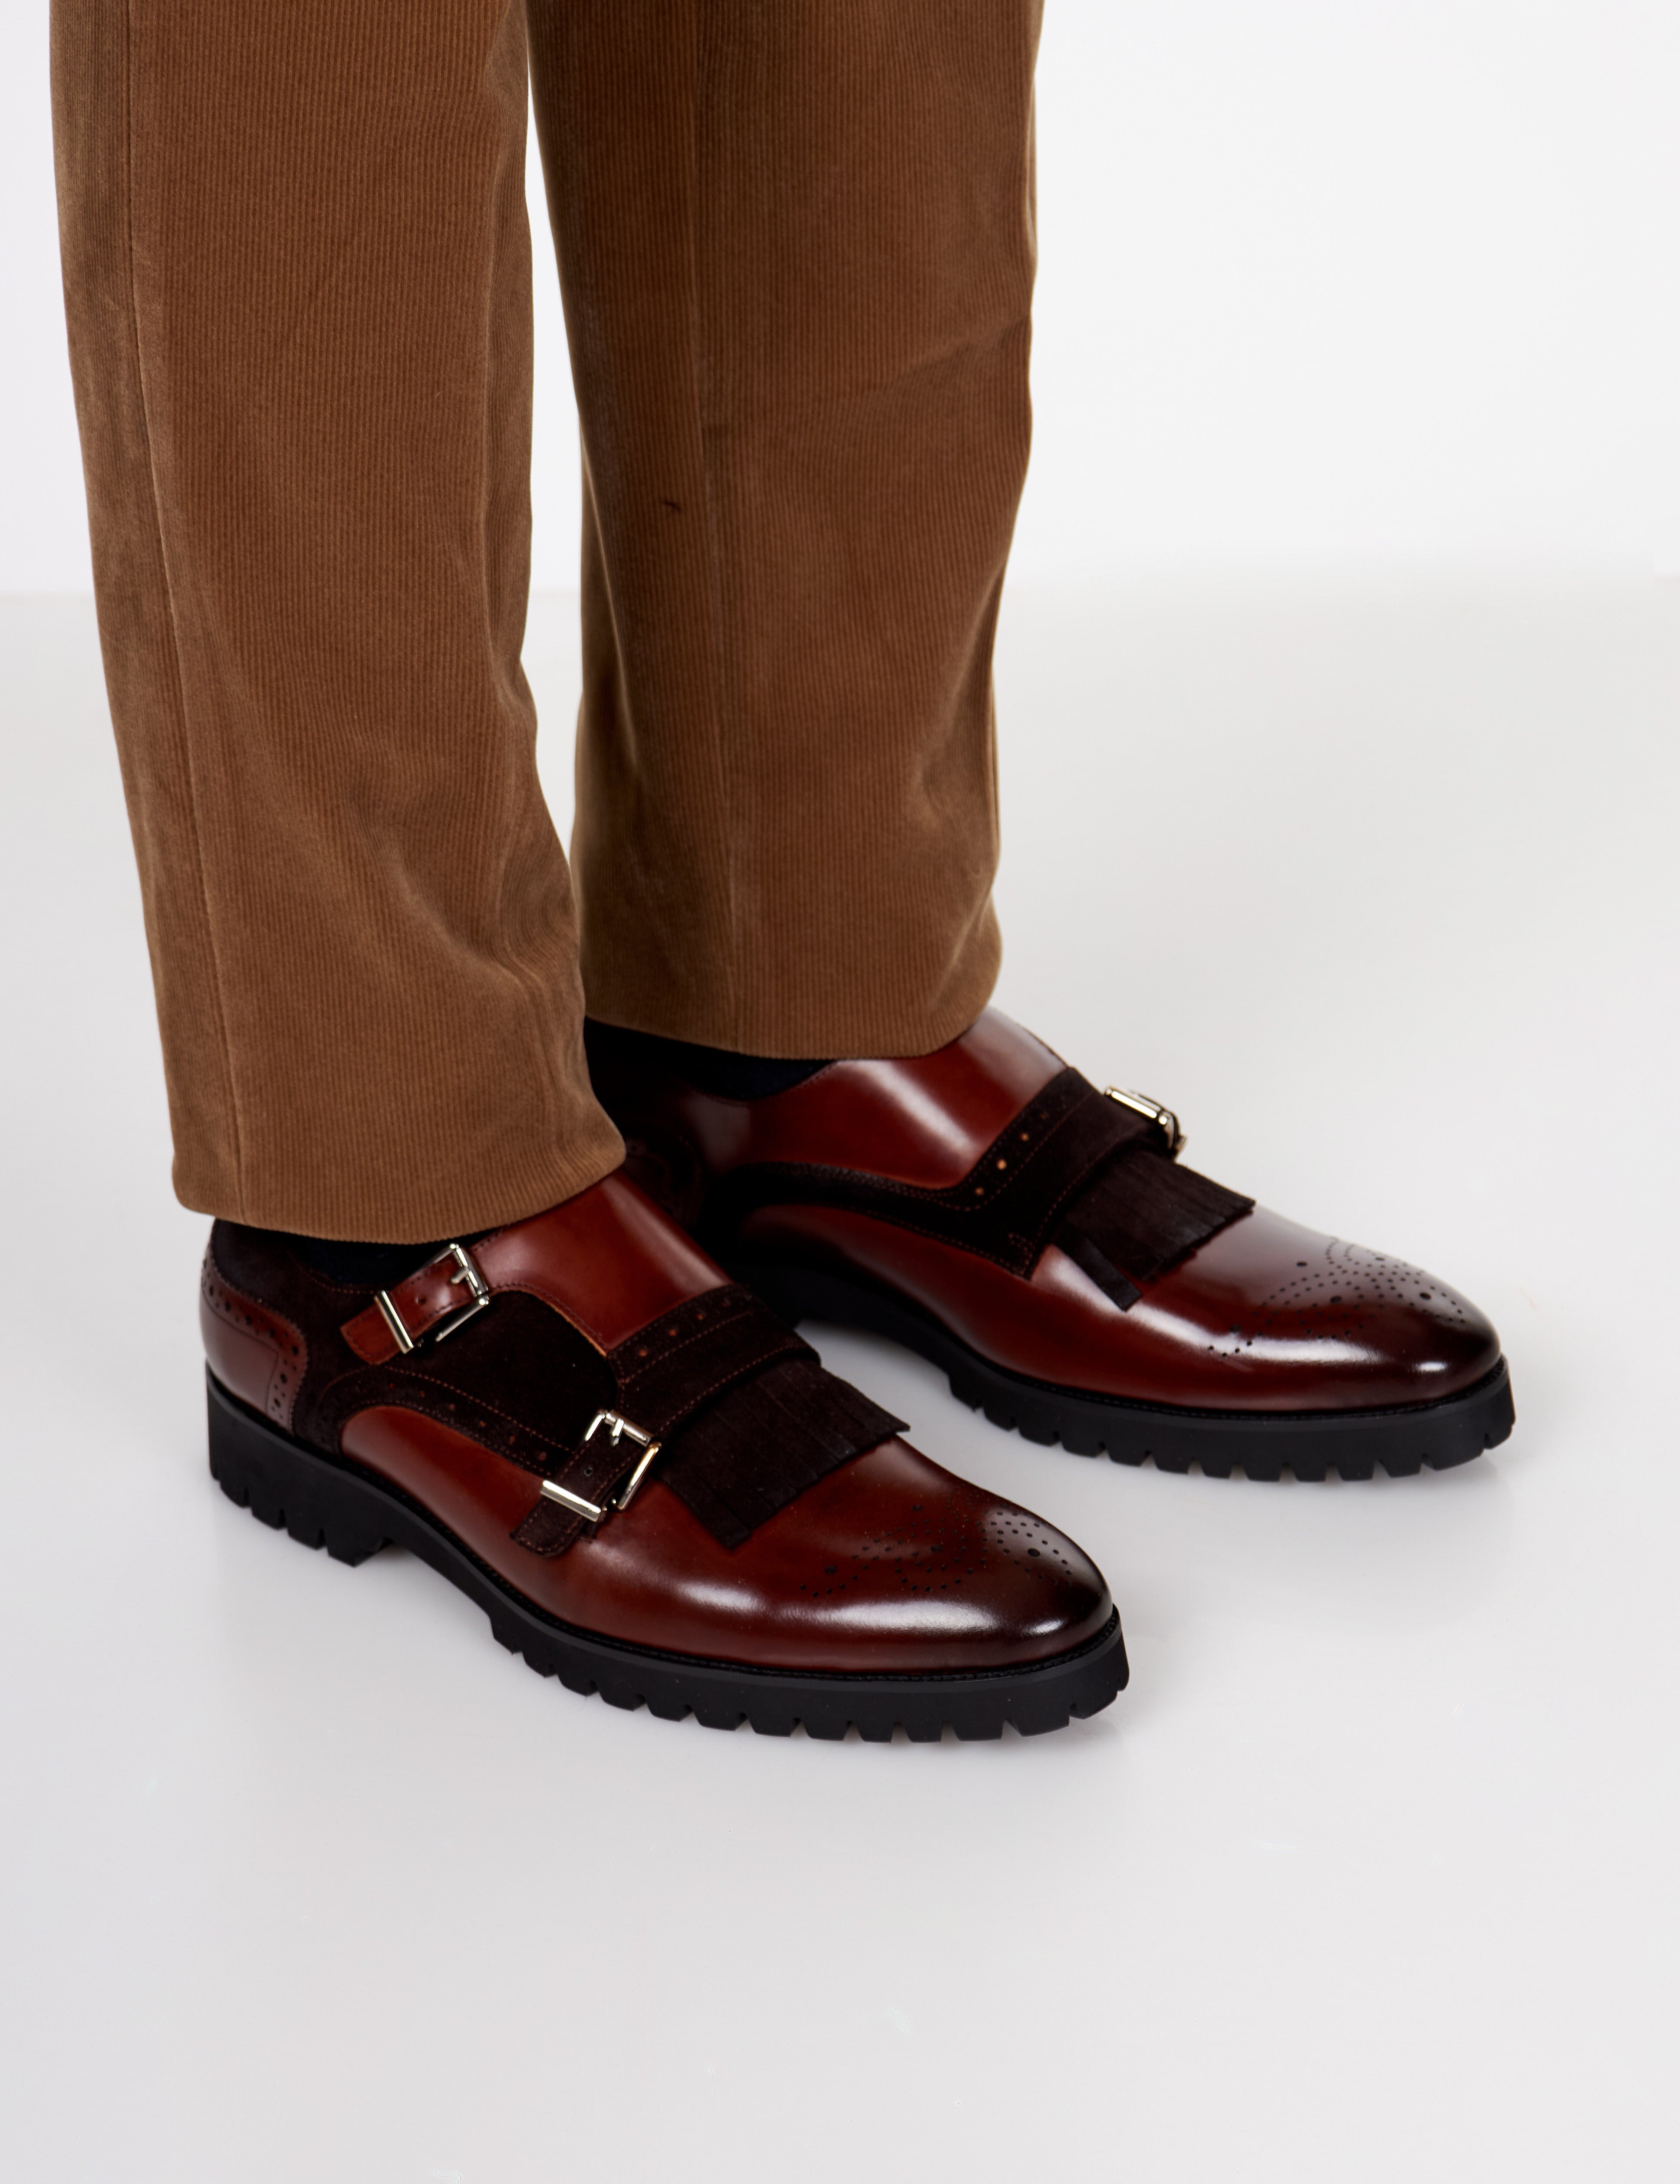 BROWN LEATHER & SUEDE DOUBLE MONK SHOES